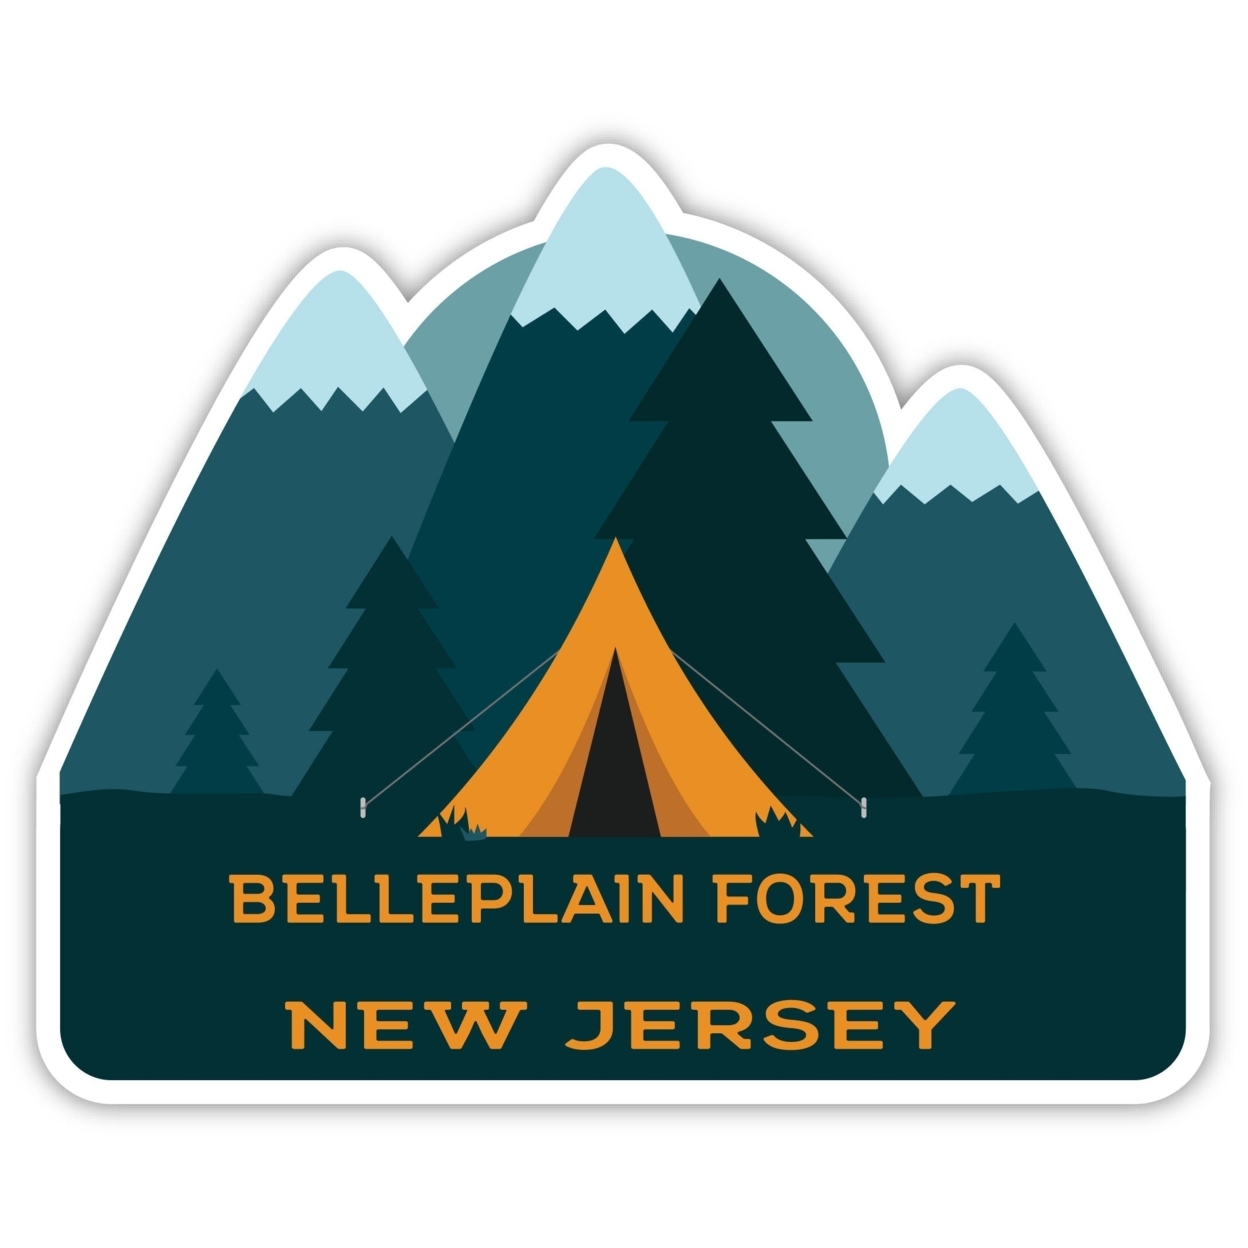 Belleplain Forest New Jersey Souvenir Decorative Stickers (Choose Theme And Size) - 4-Pack, 10-Inch, Tent